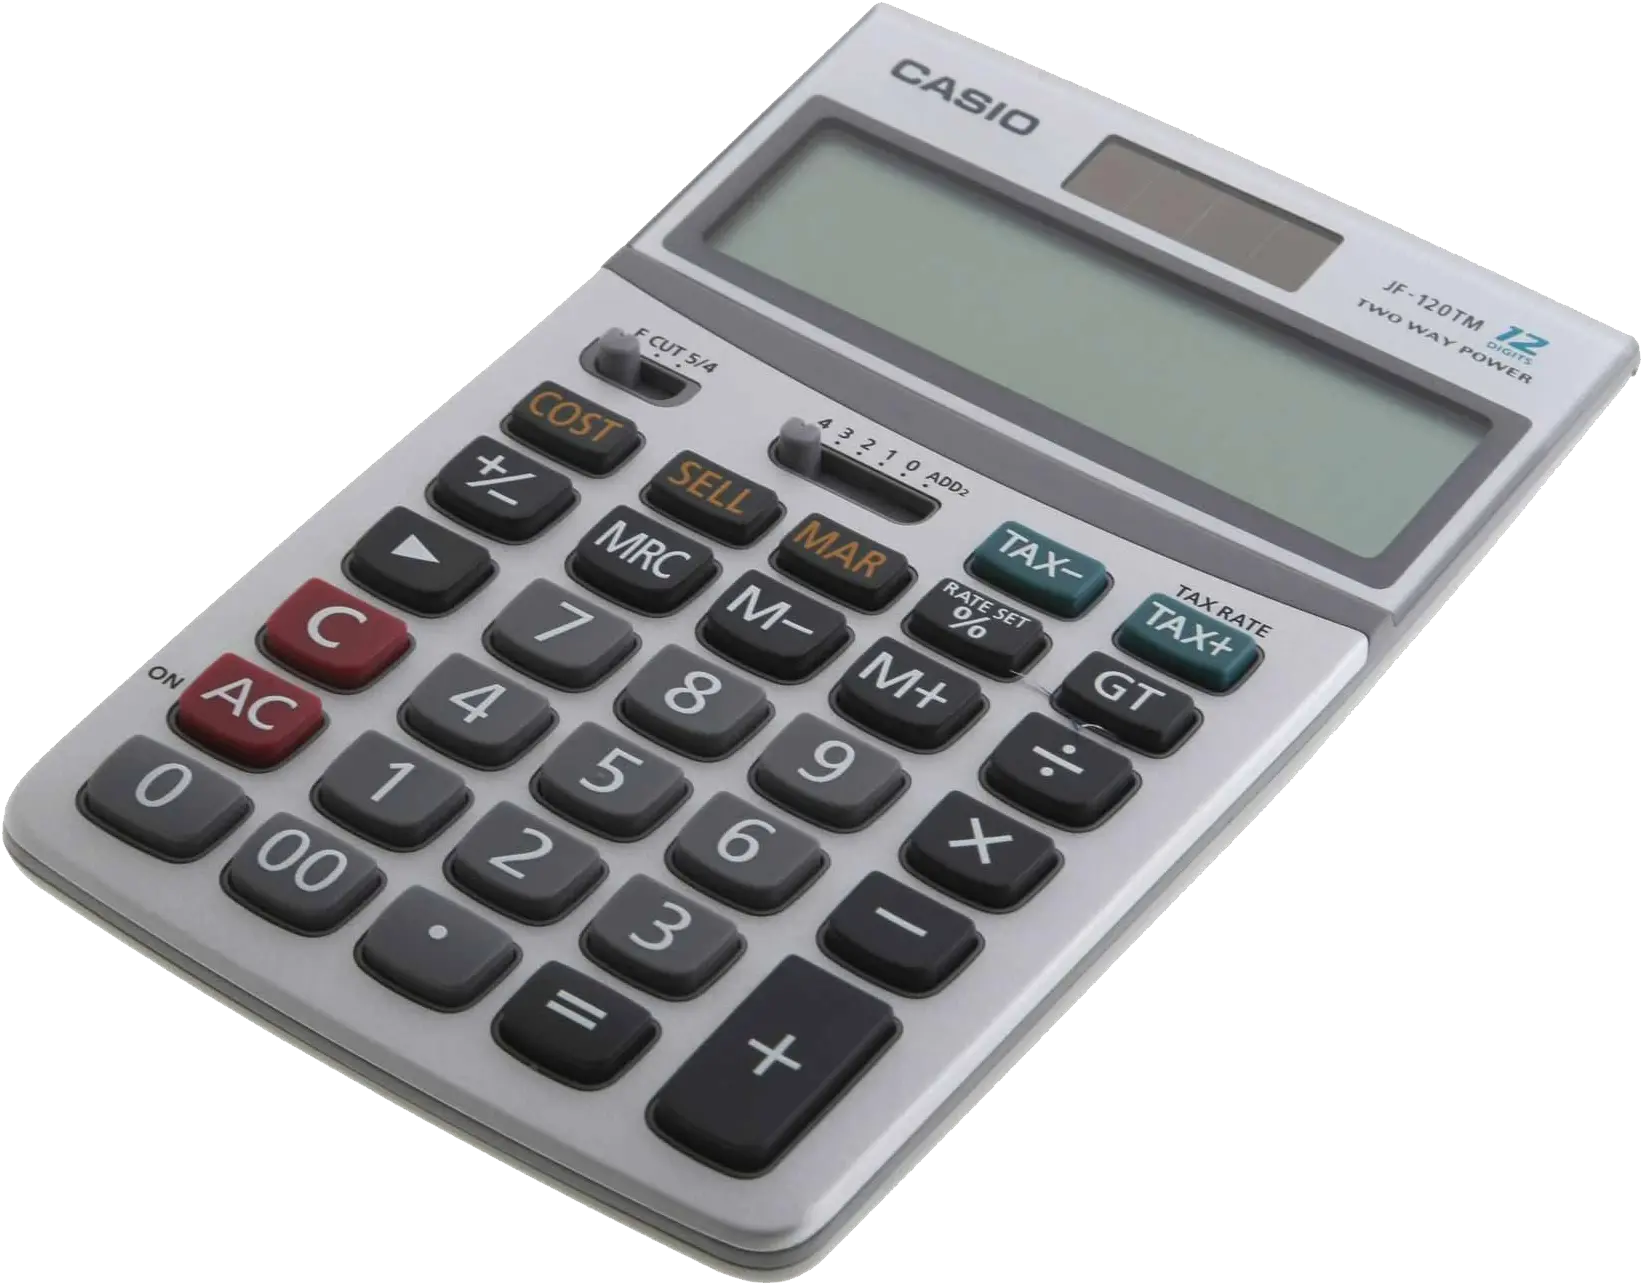 Calculator Png Image For Free Download Transparent Calculator Png Calculator Png